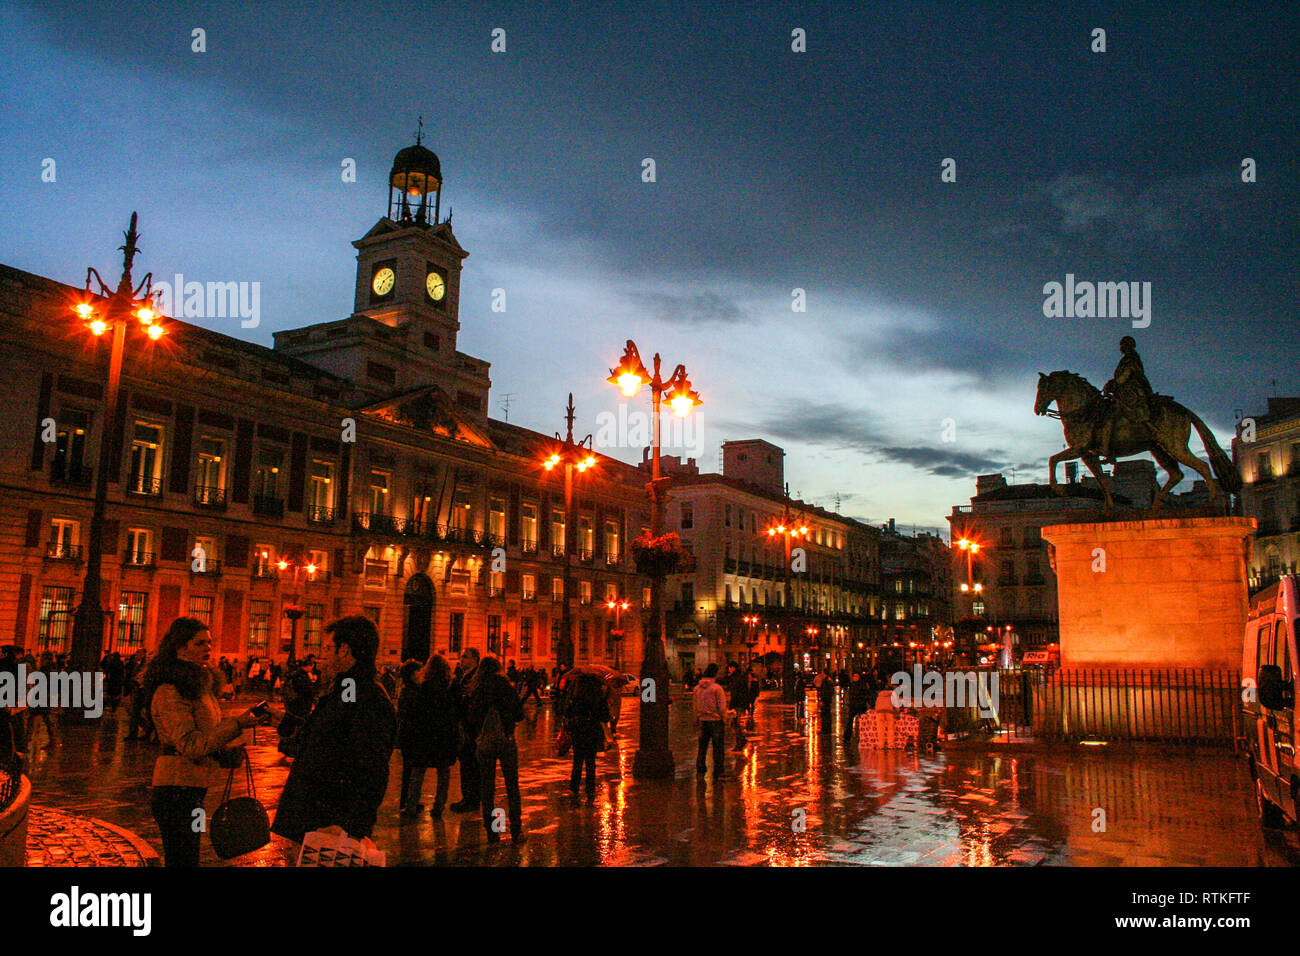 At Madrid - Spain - On february 2010 - Puerta del Sol at night Stock Photo